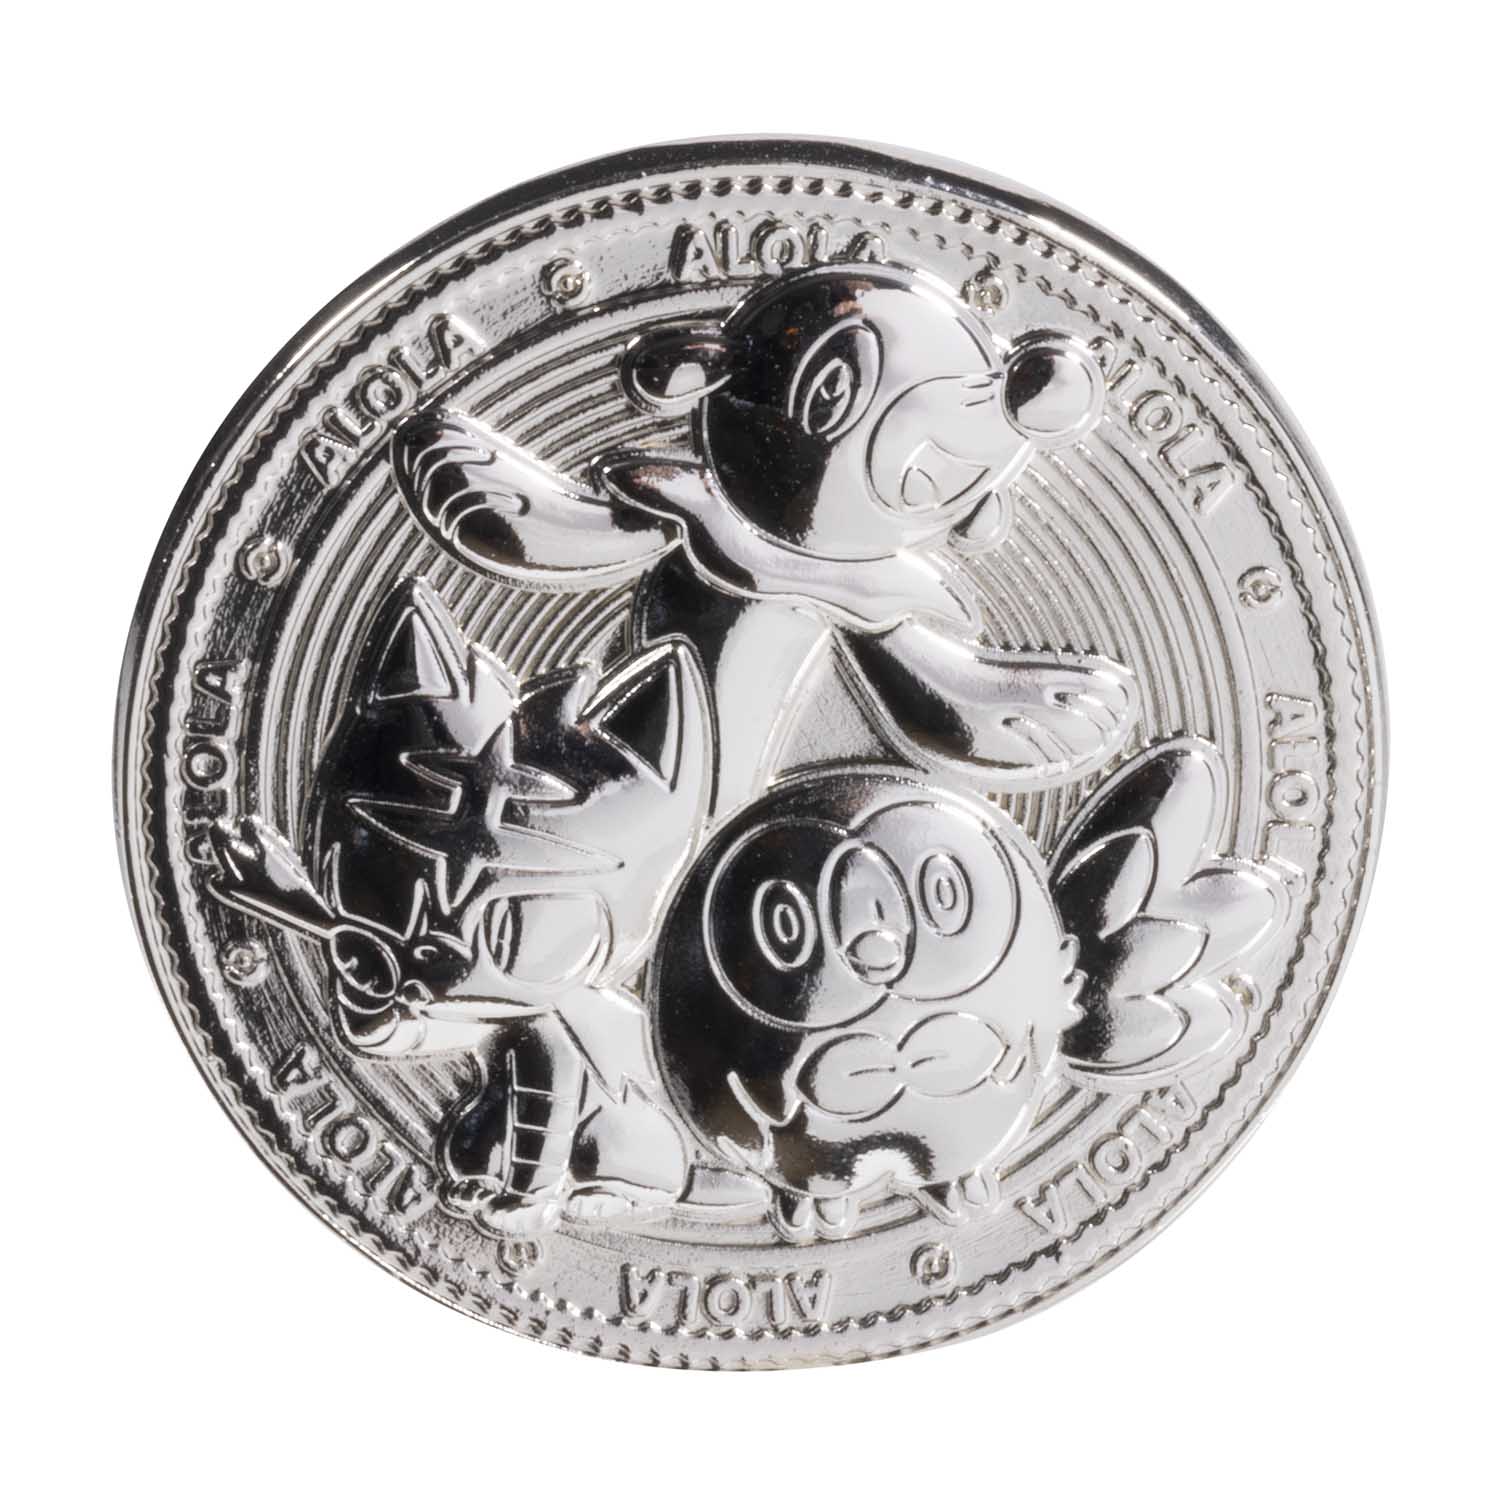 Genuine Pokemon Coins Mint Your Choice! 